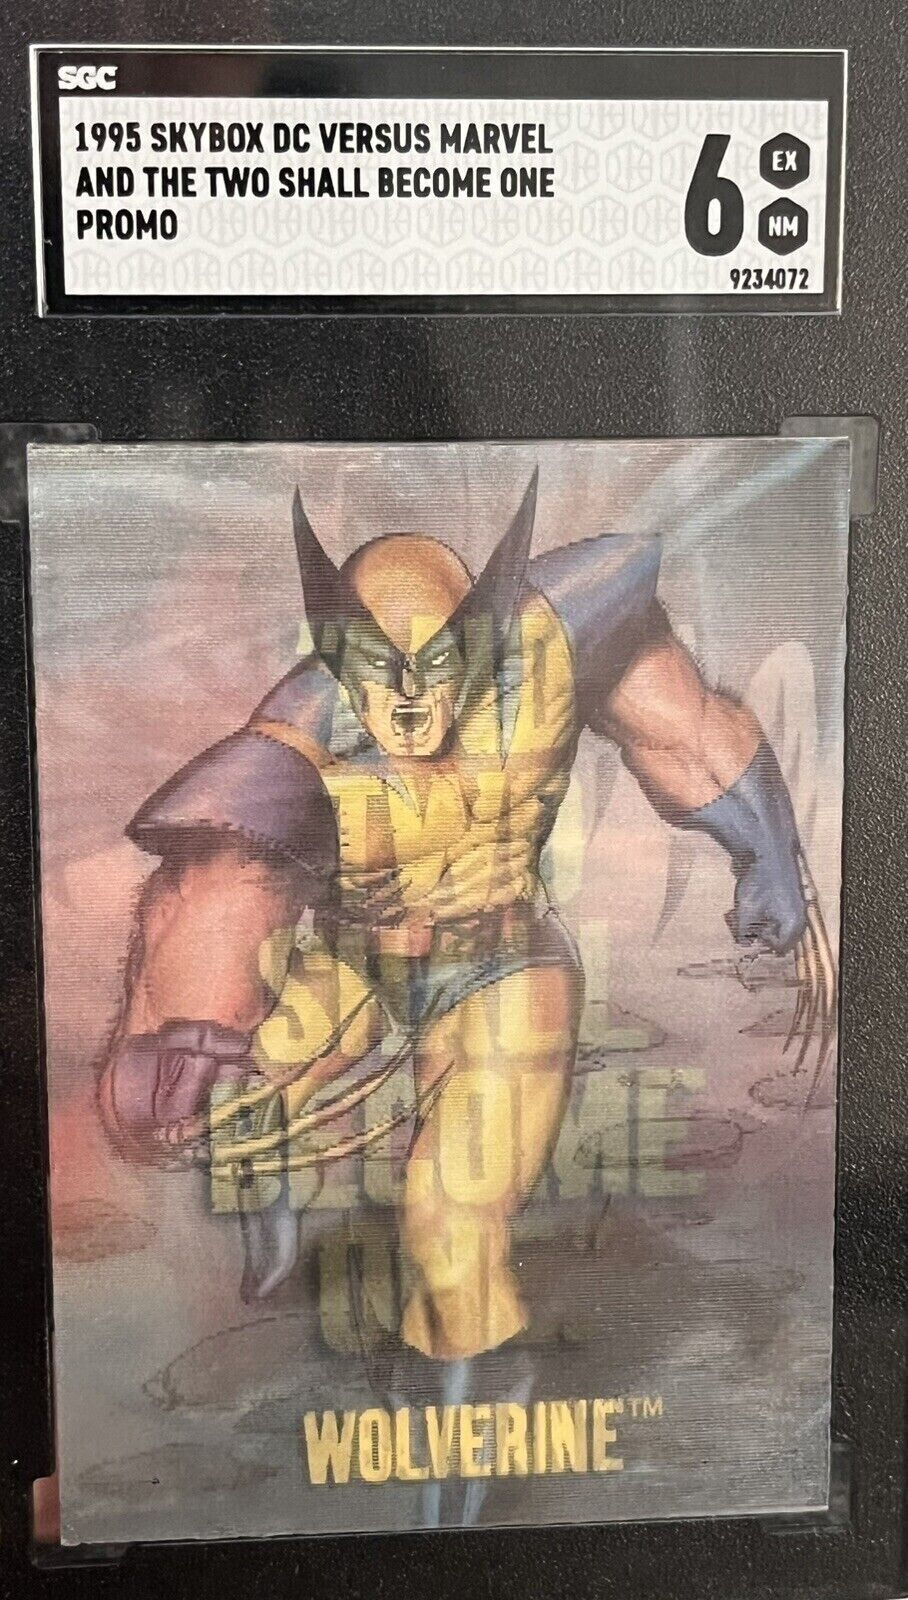 1995 Fleer DC VERSUS MARVEL AND TWO SHALL BECOME ONE WOLVERINE BATMAN PROMO CARD